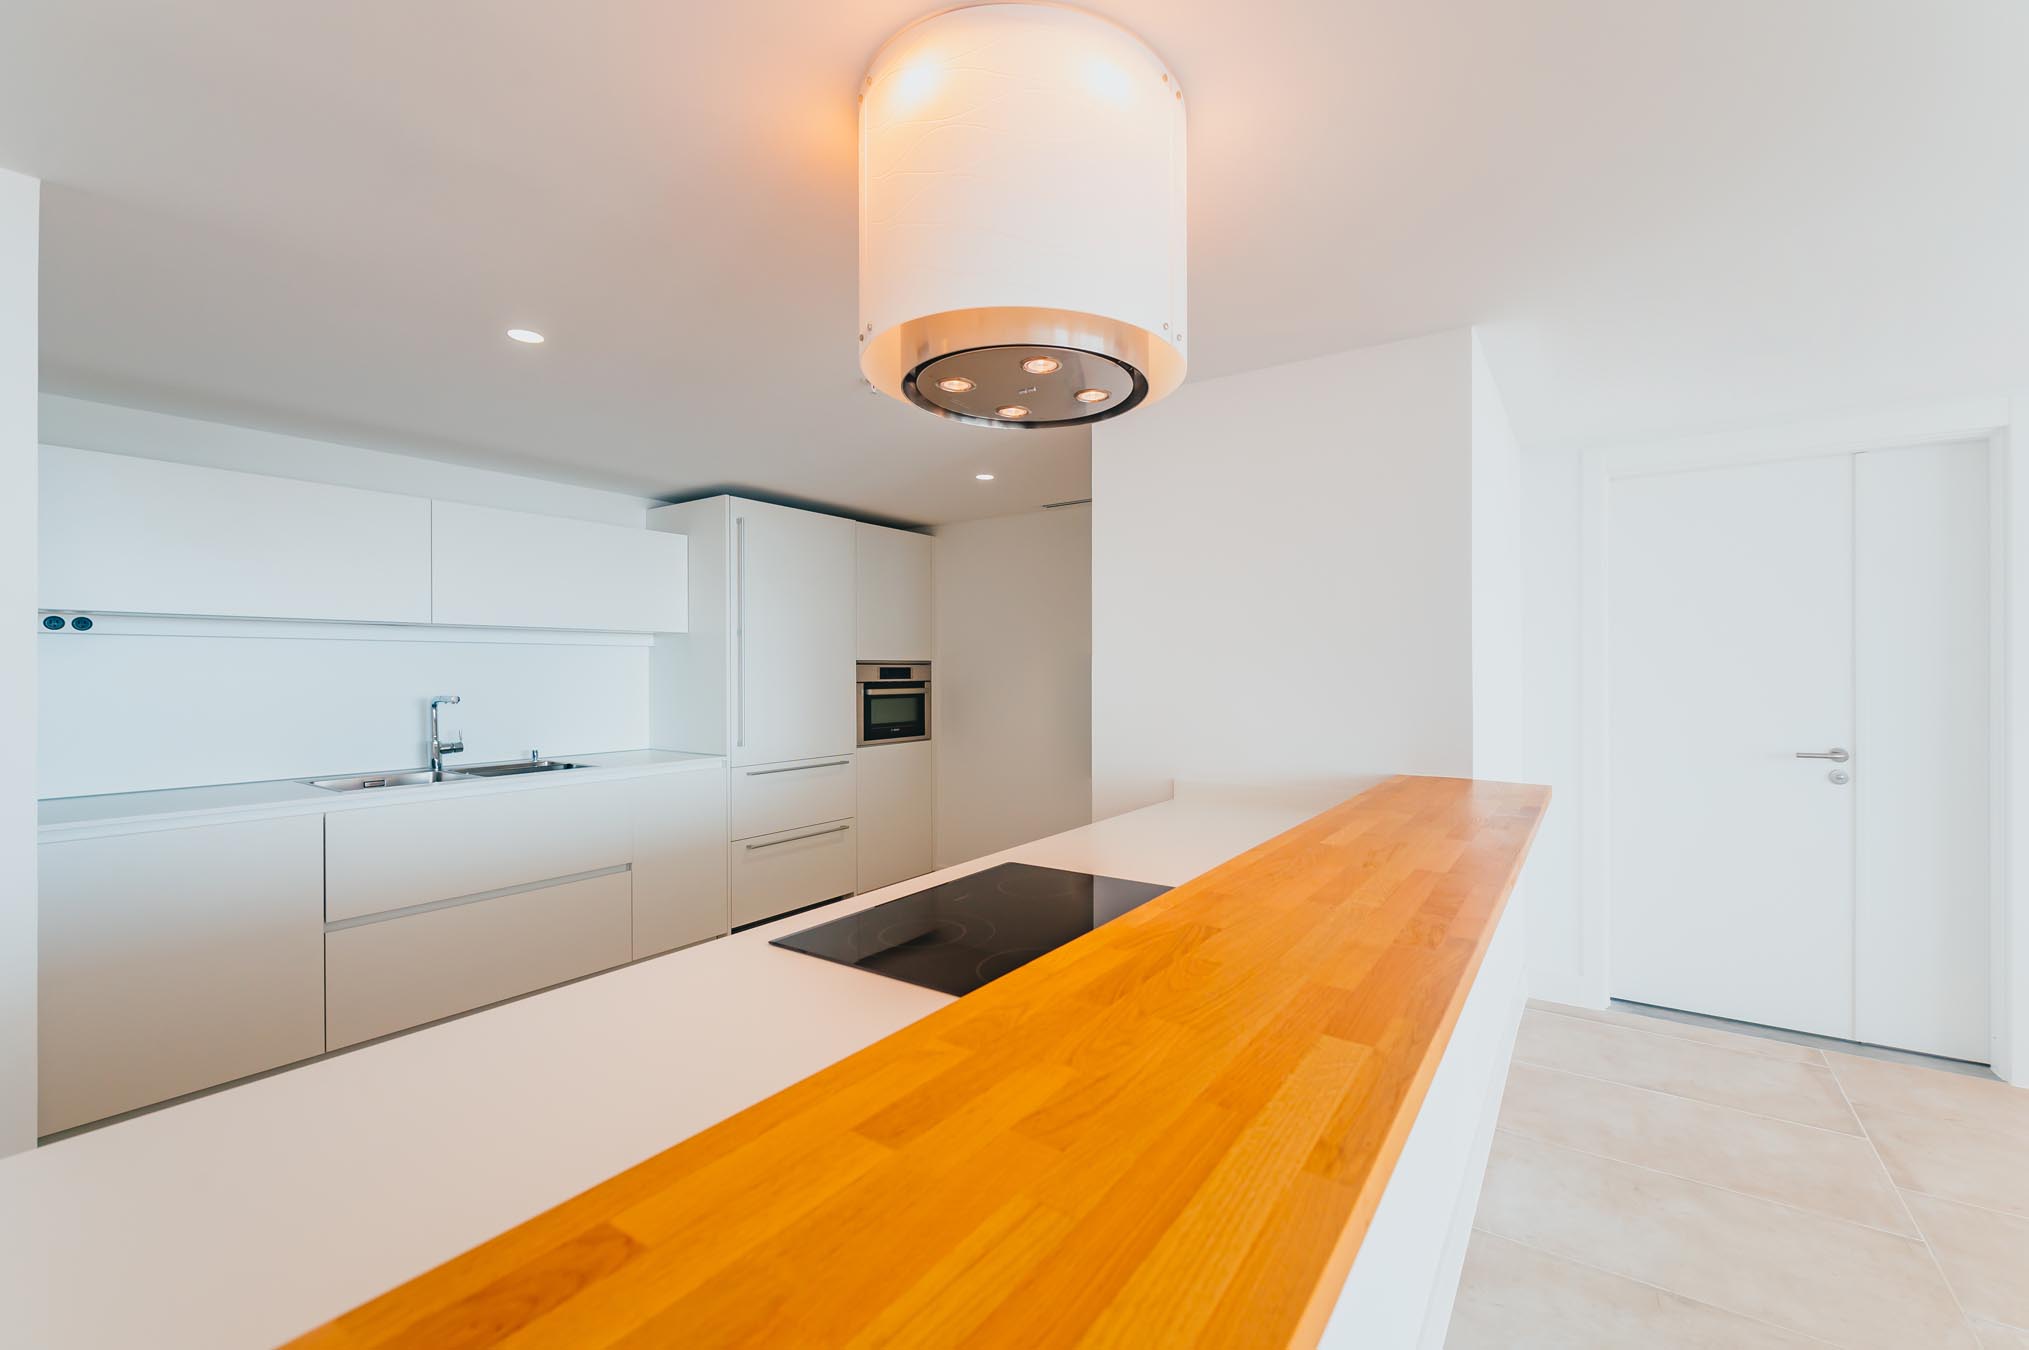 Overhead lighting and kitchen counter